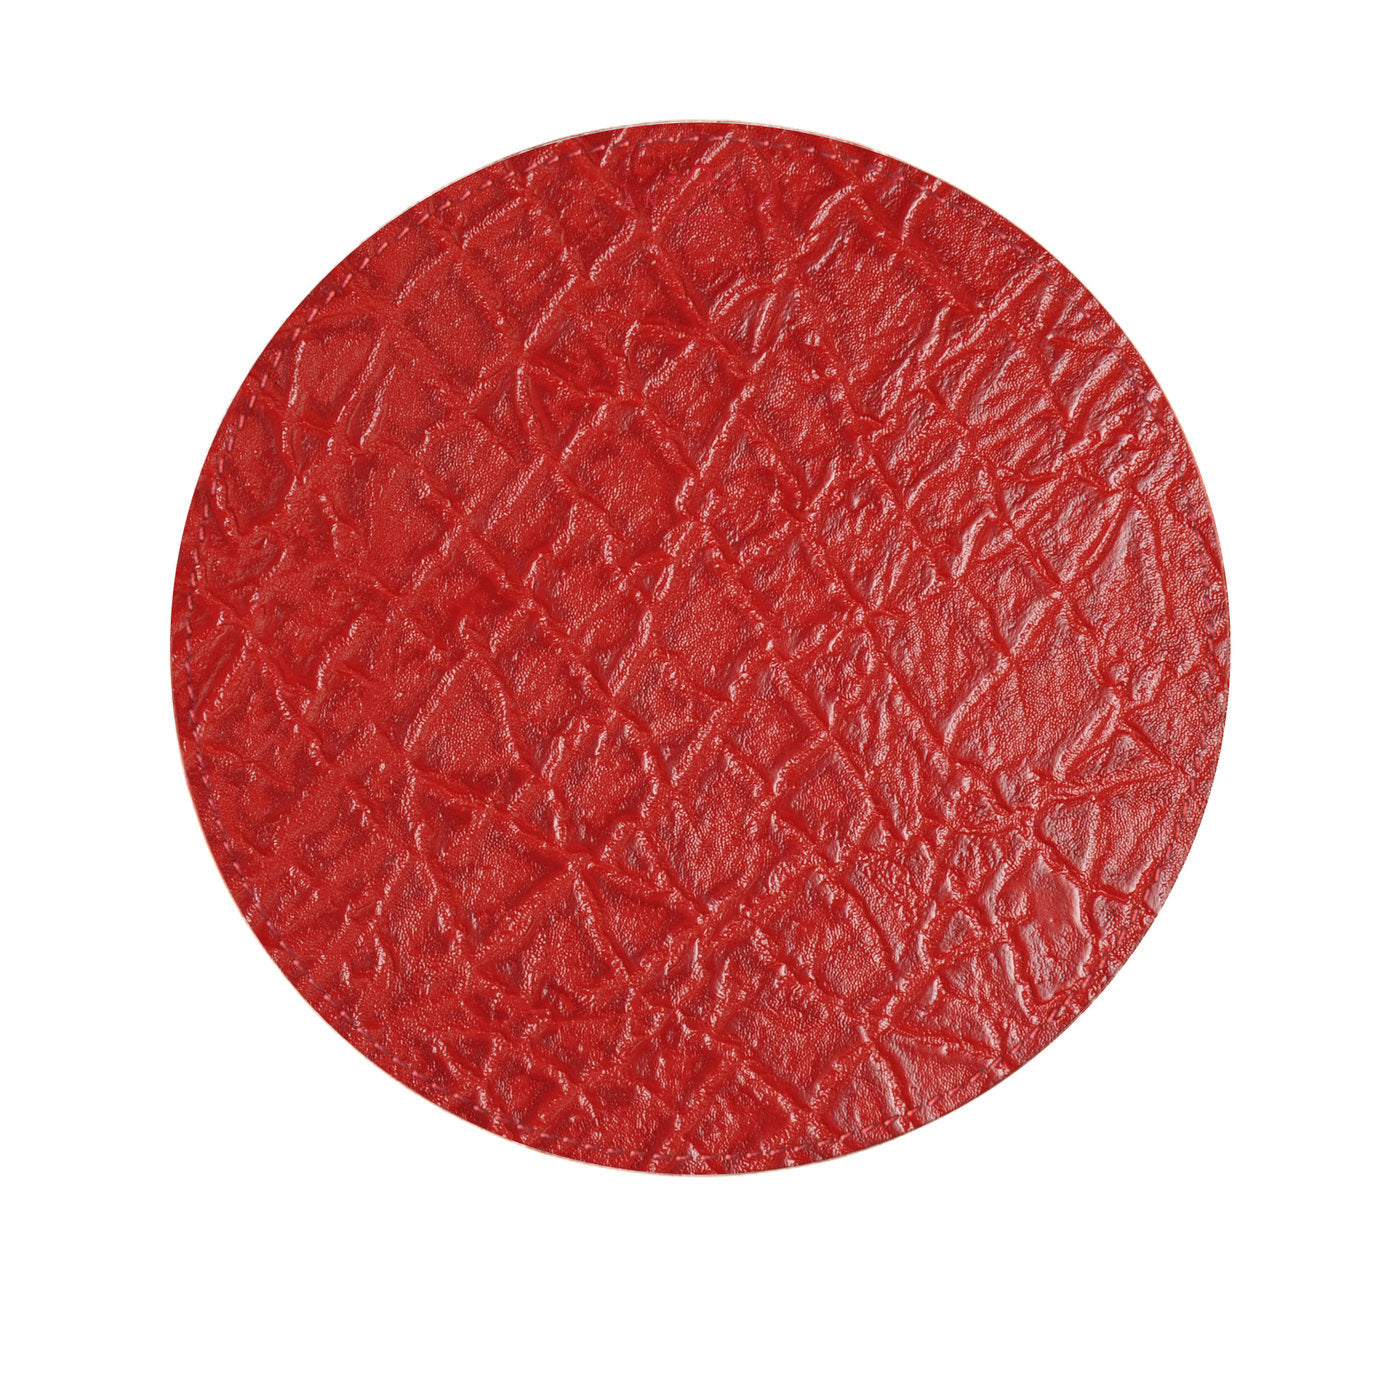 Tanzania Medium Set of 2 Round Red Leather Placemats - Alternative view 2